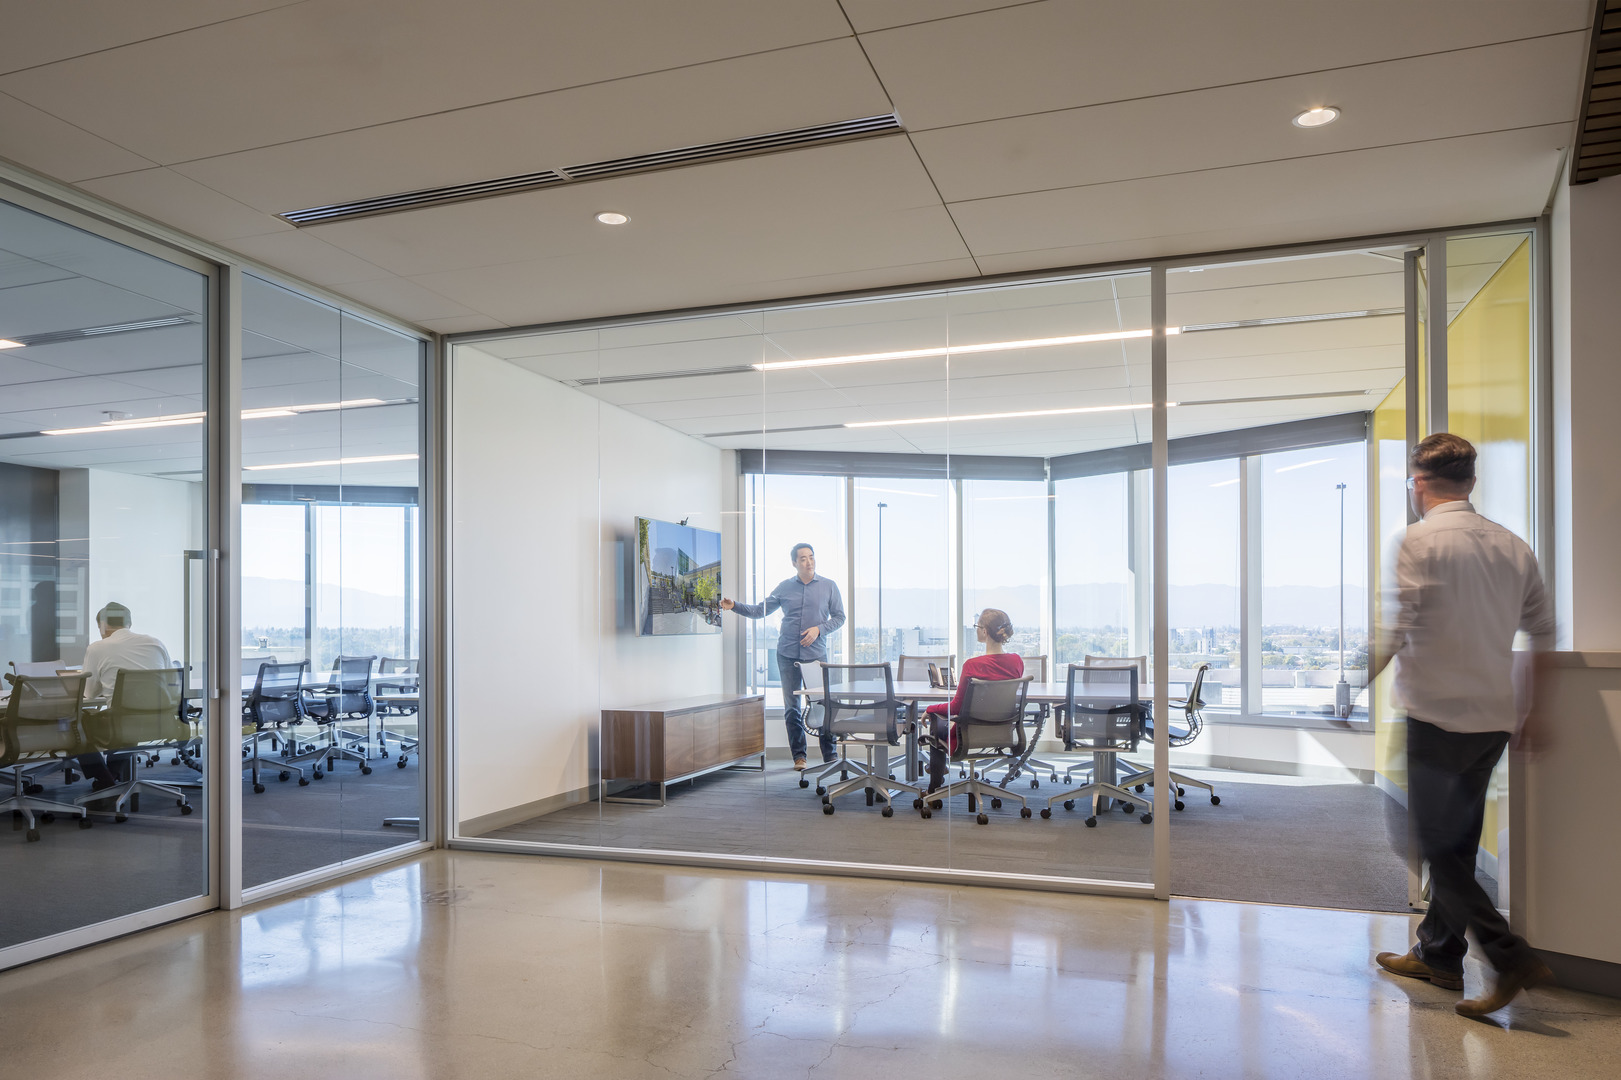 Office architecture concepts and workplace design can greatly impact occupant morale and behavior.